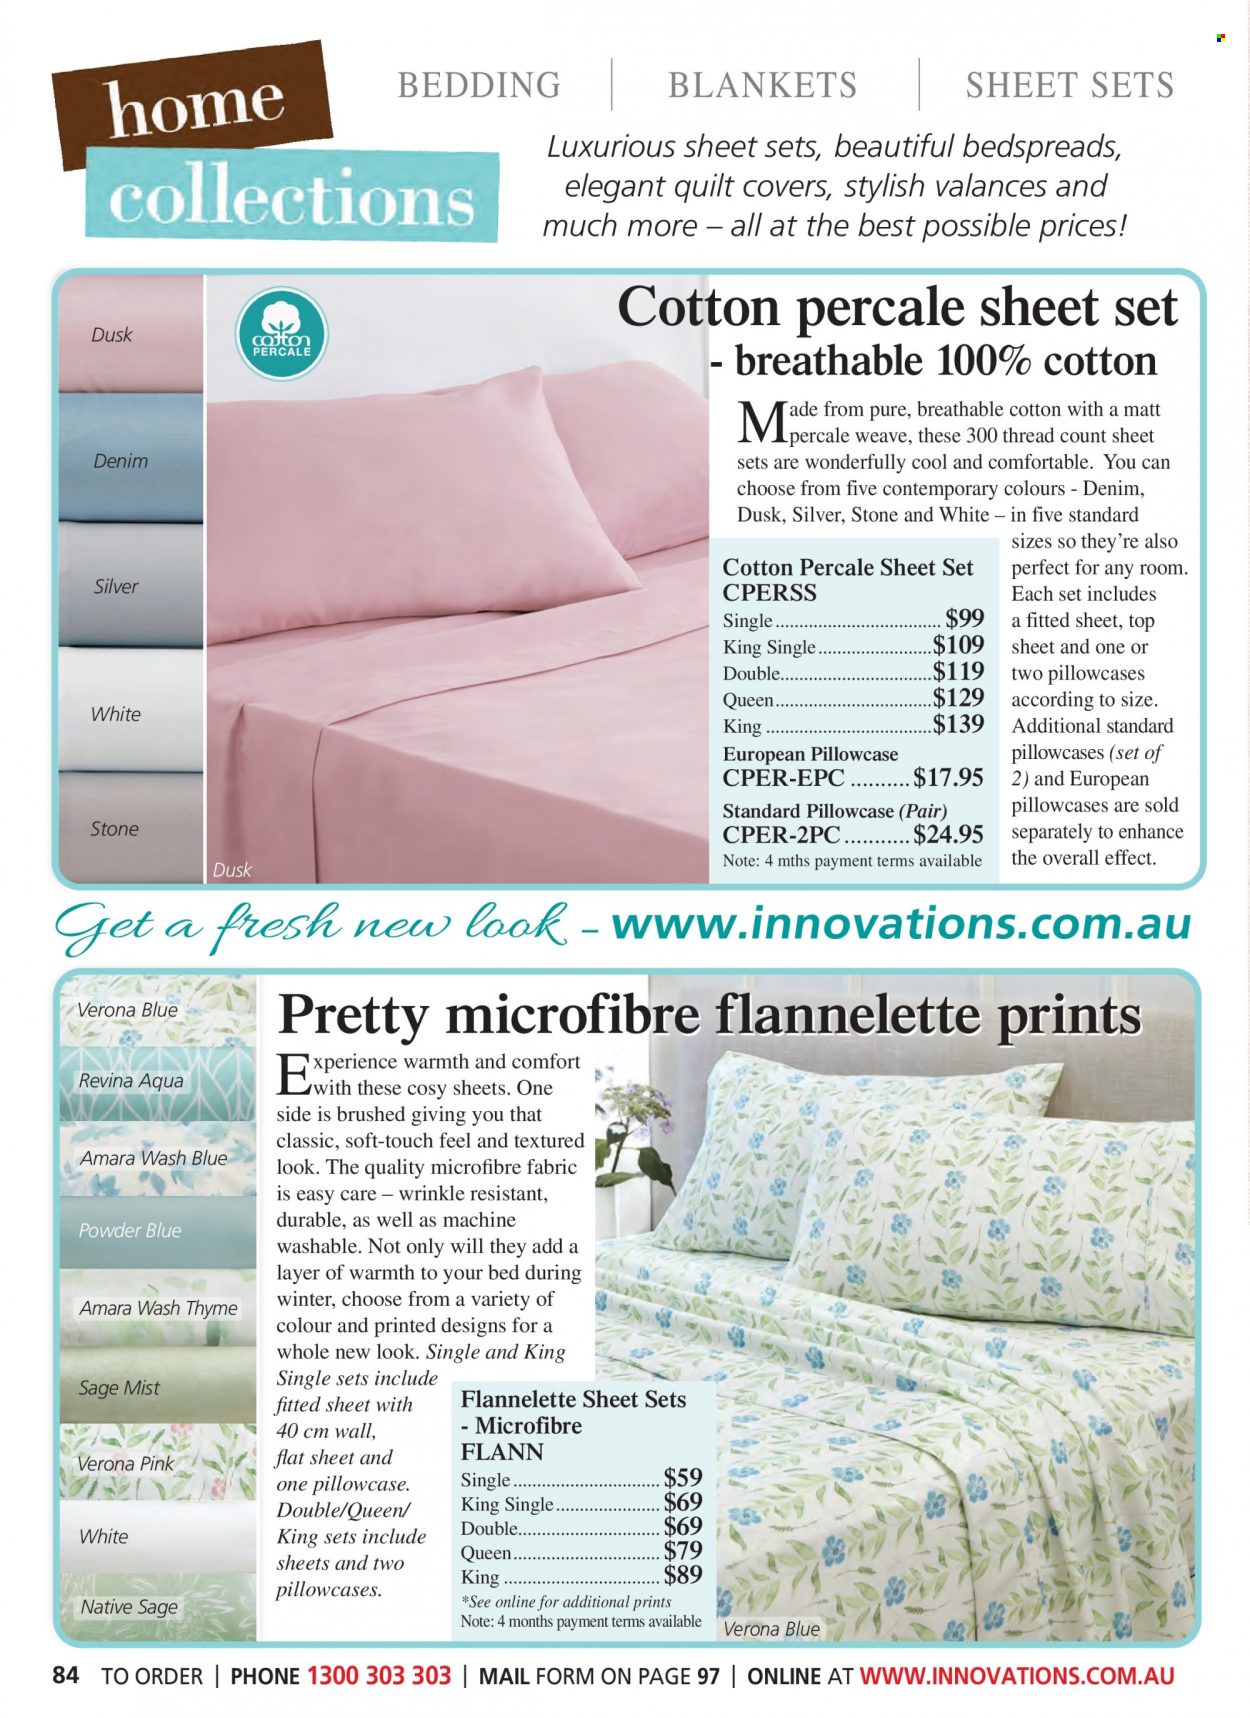 thumbnail - Innovations Catalogue - Sales products - bedding, bedspread, blanket, pillowcase, quilt, flannelette sheets, quilt cover set. Page 84.